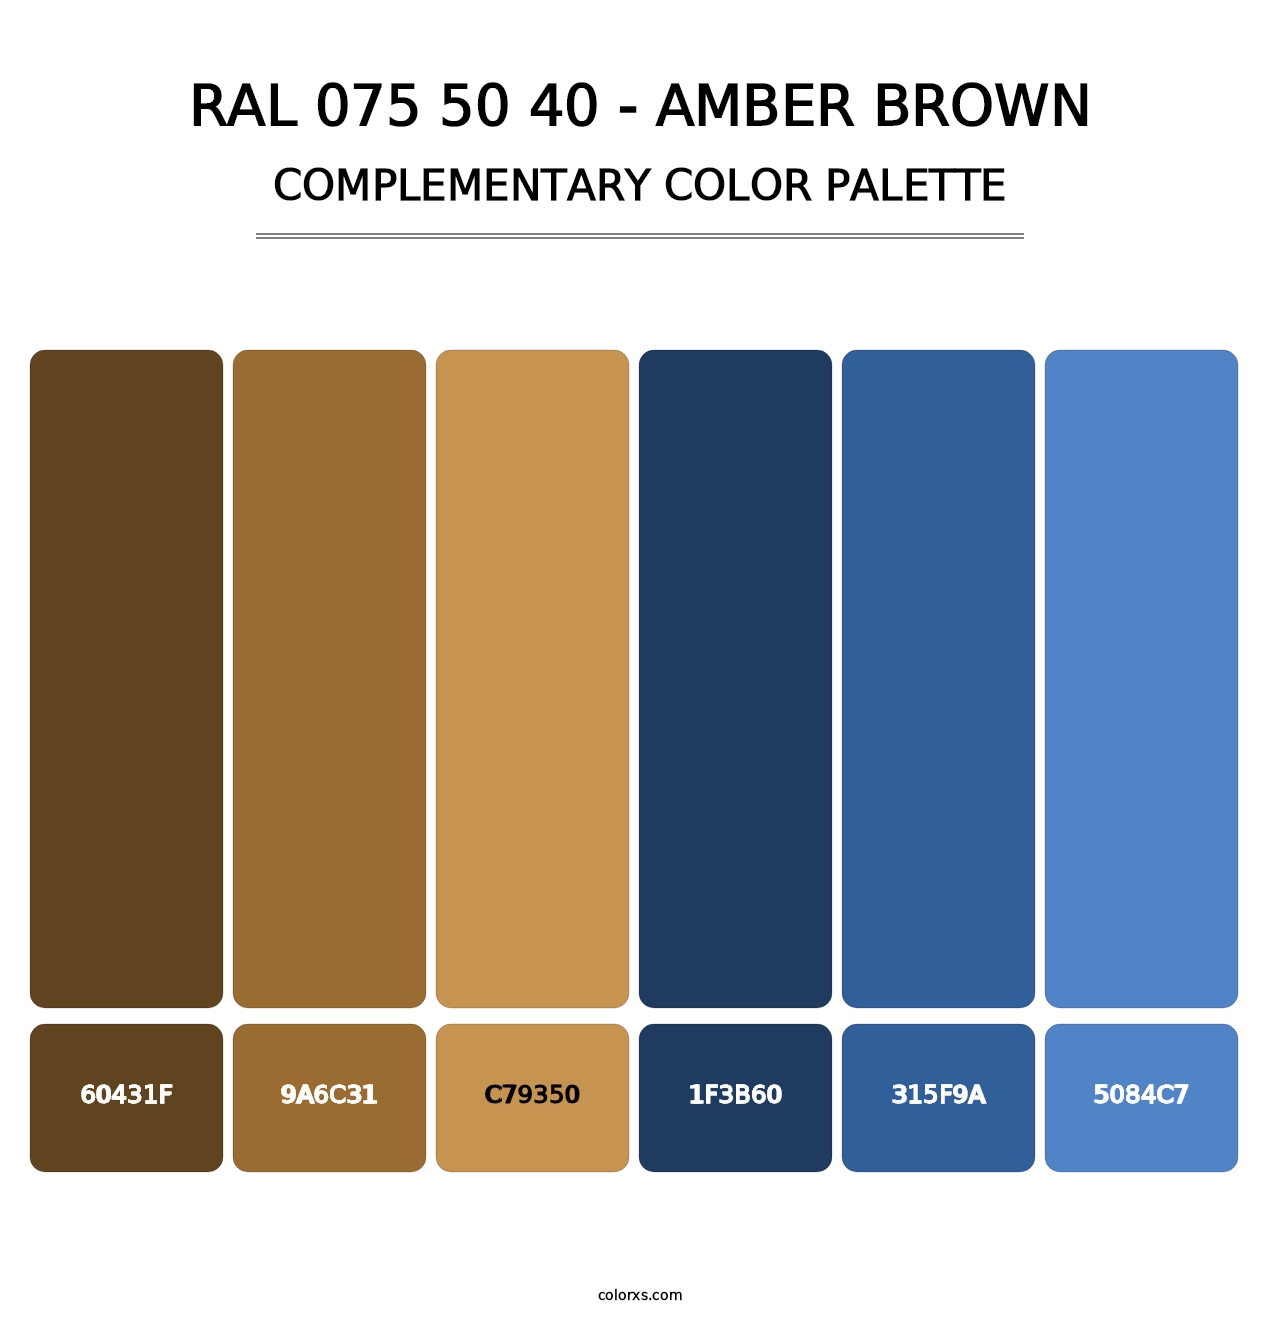 RAL 075 50 40 - Amber Brown - Complementary Color Palette